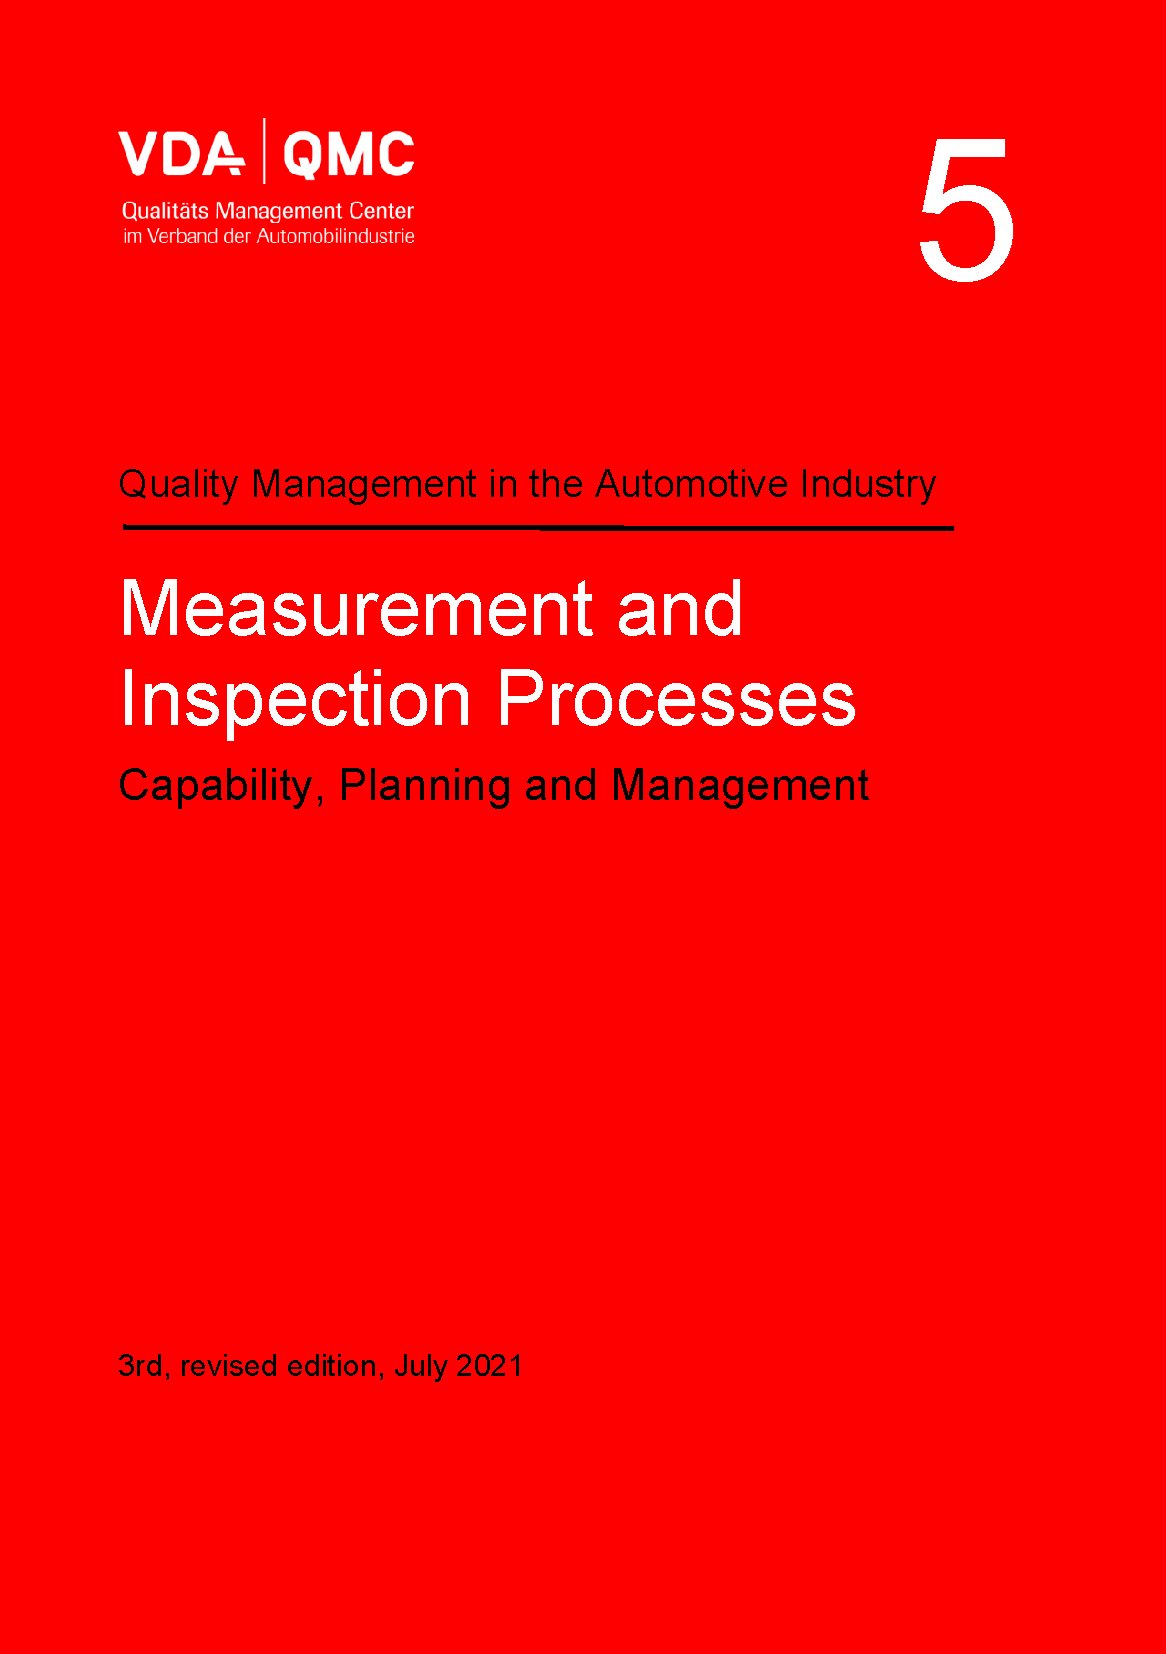 Publikácie  VDA Volume 5 Measurement and Inspection Processes.
 Capability, Planning and Management, 3rd revised edition, July 2021 1.7.2021 náhľad